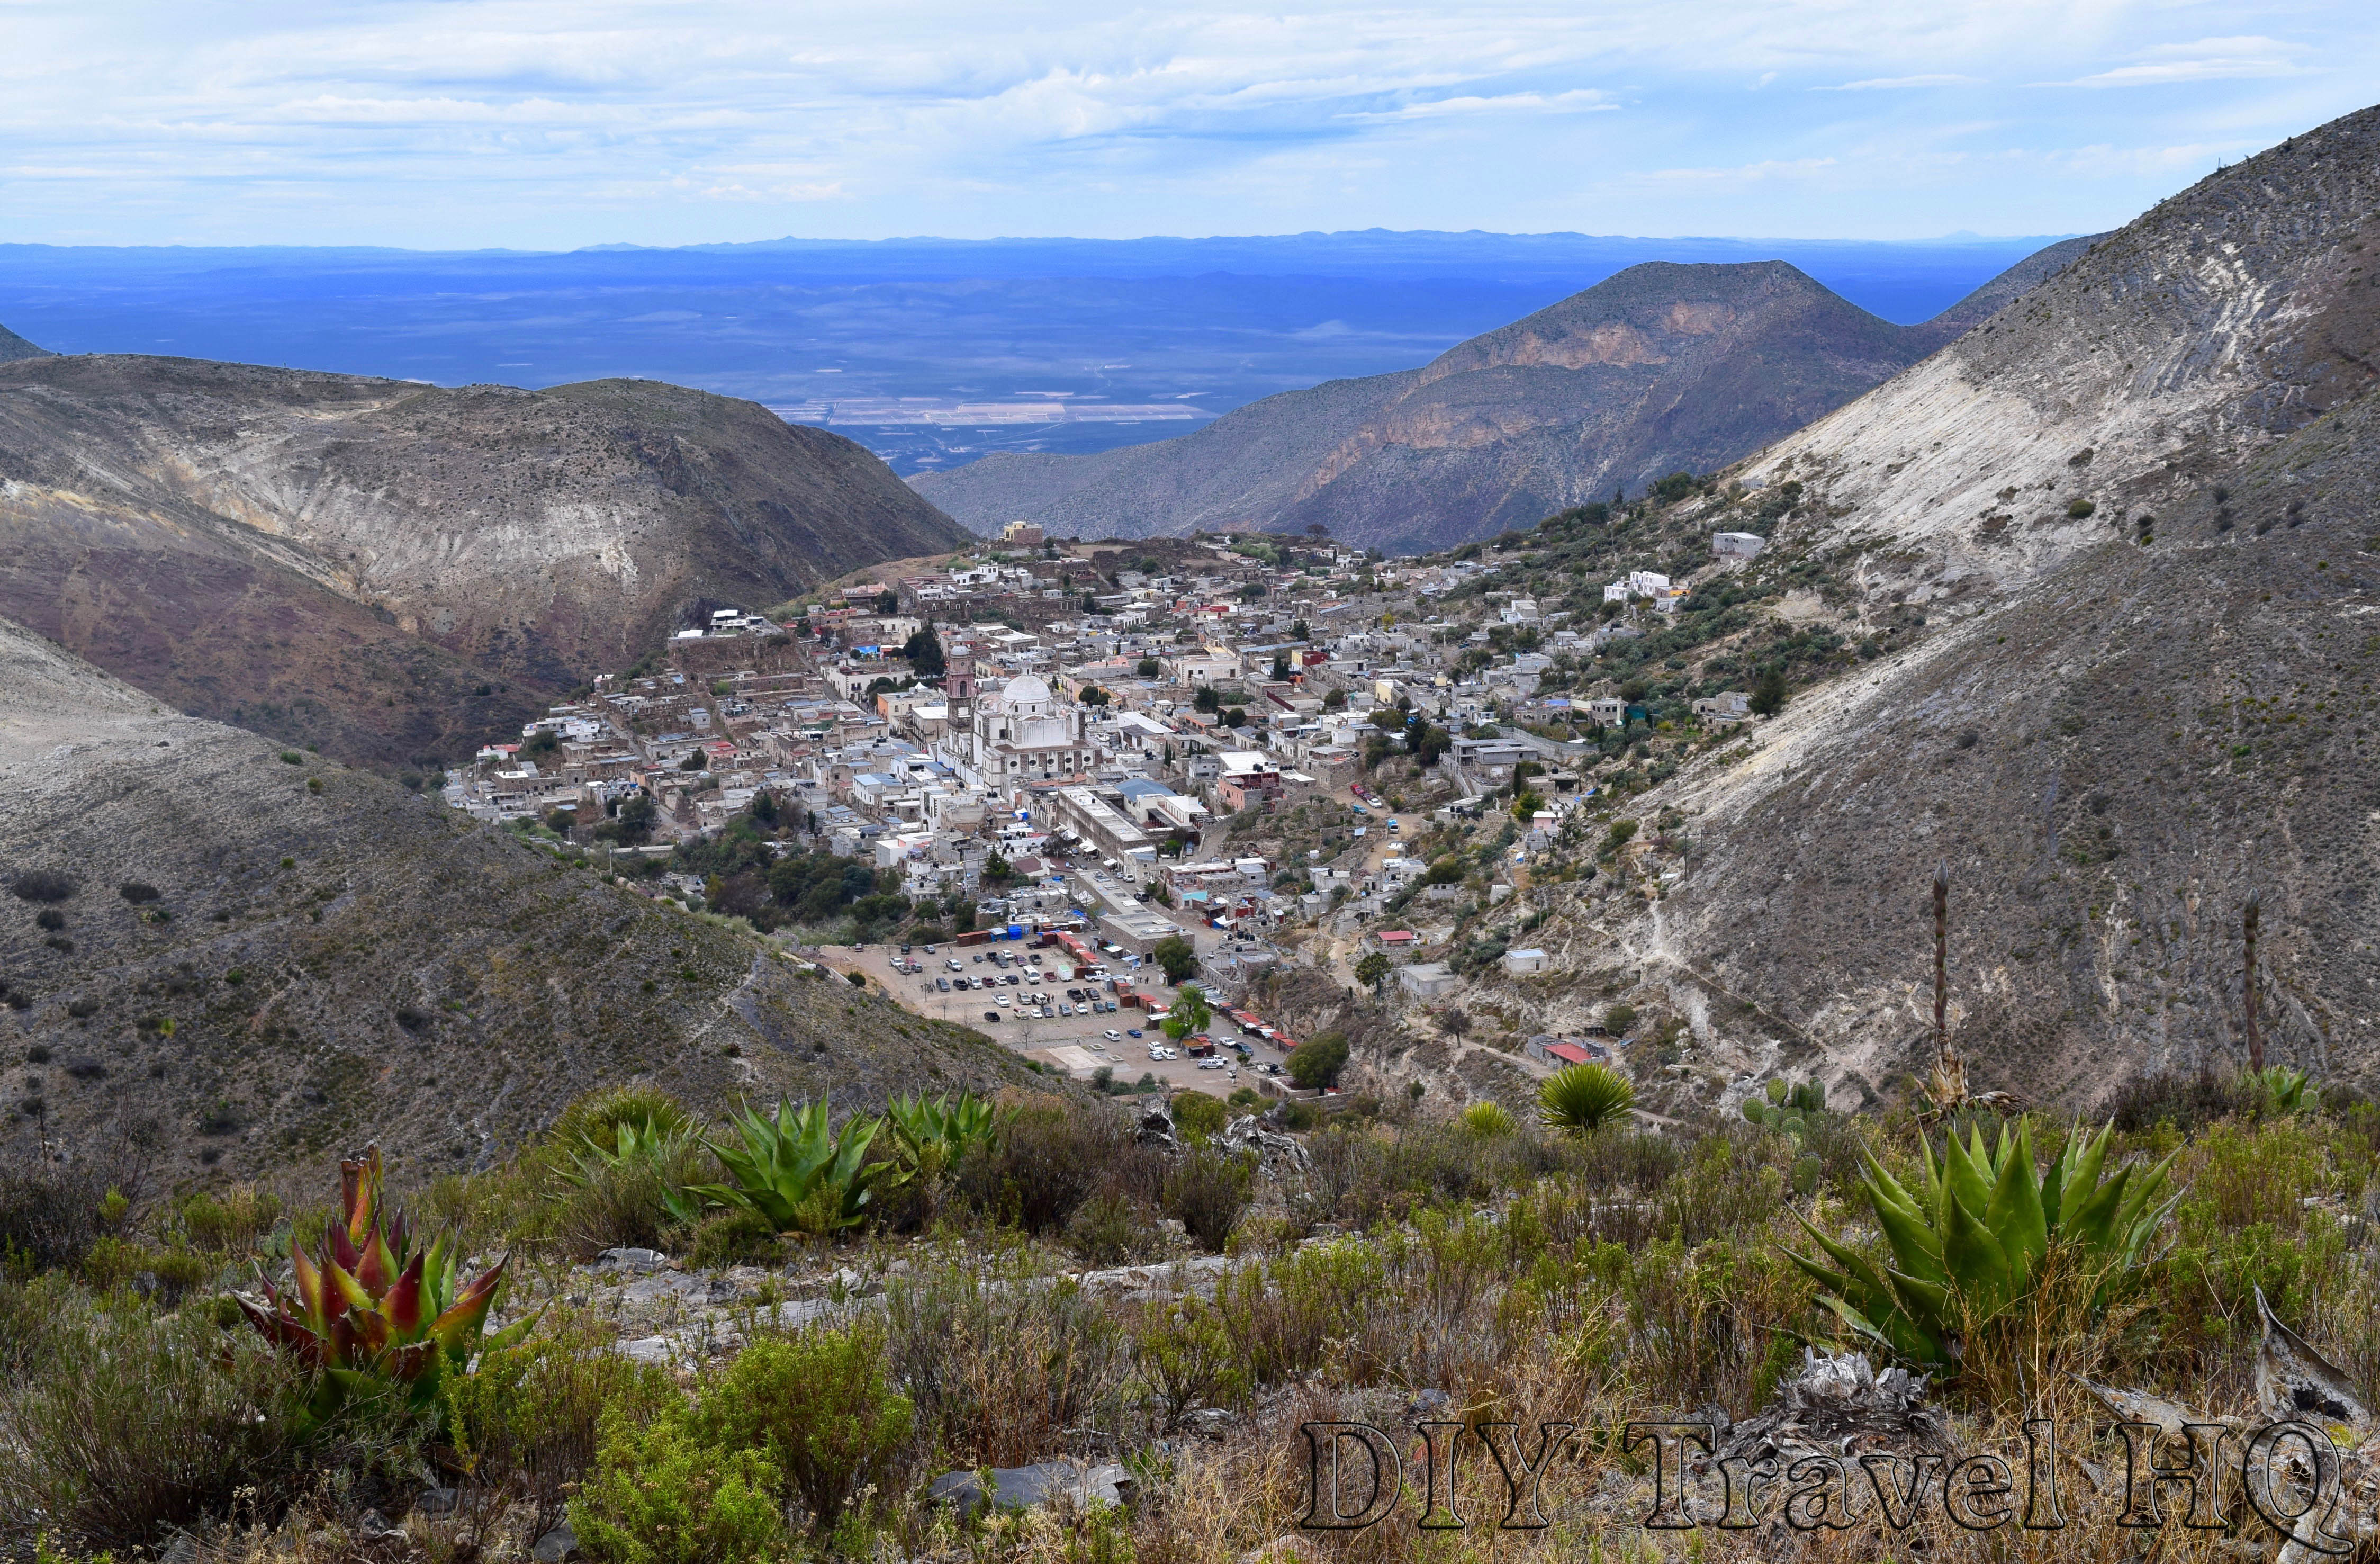 Things to do in Real de Catorce: Planning Your Visit - DIY Travel HQ